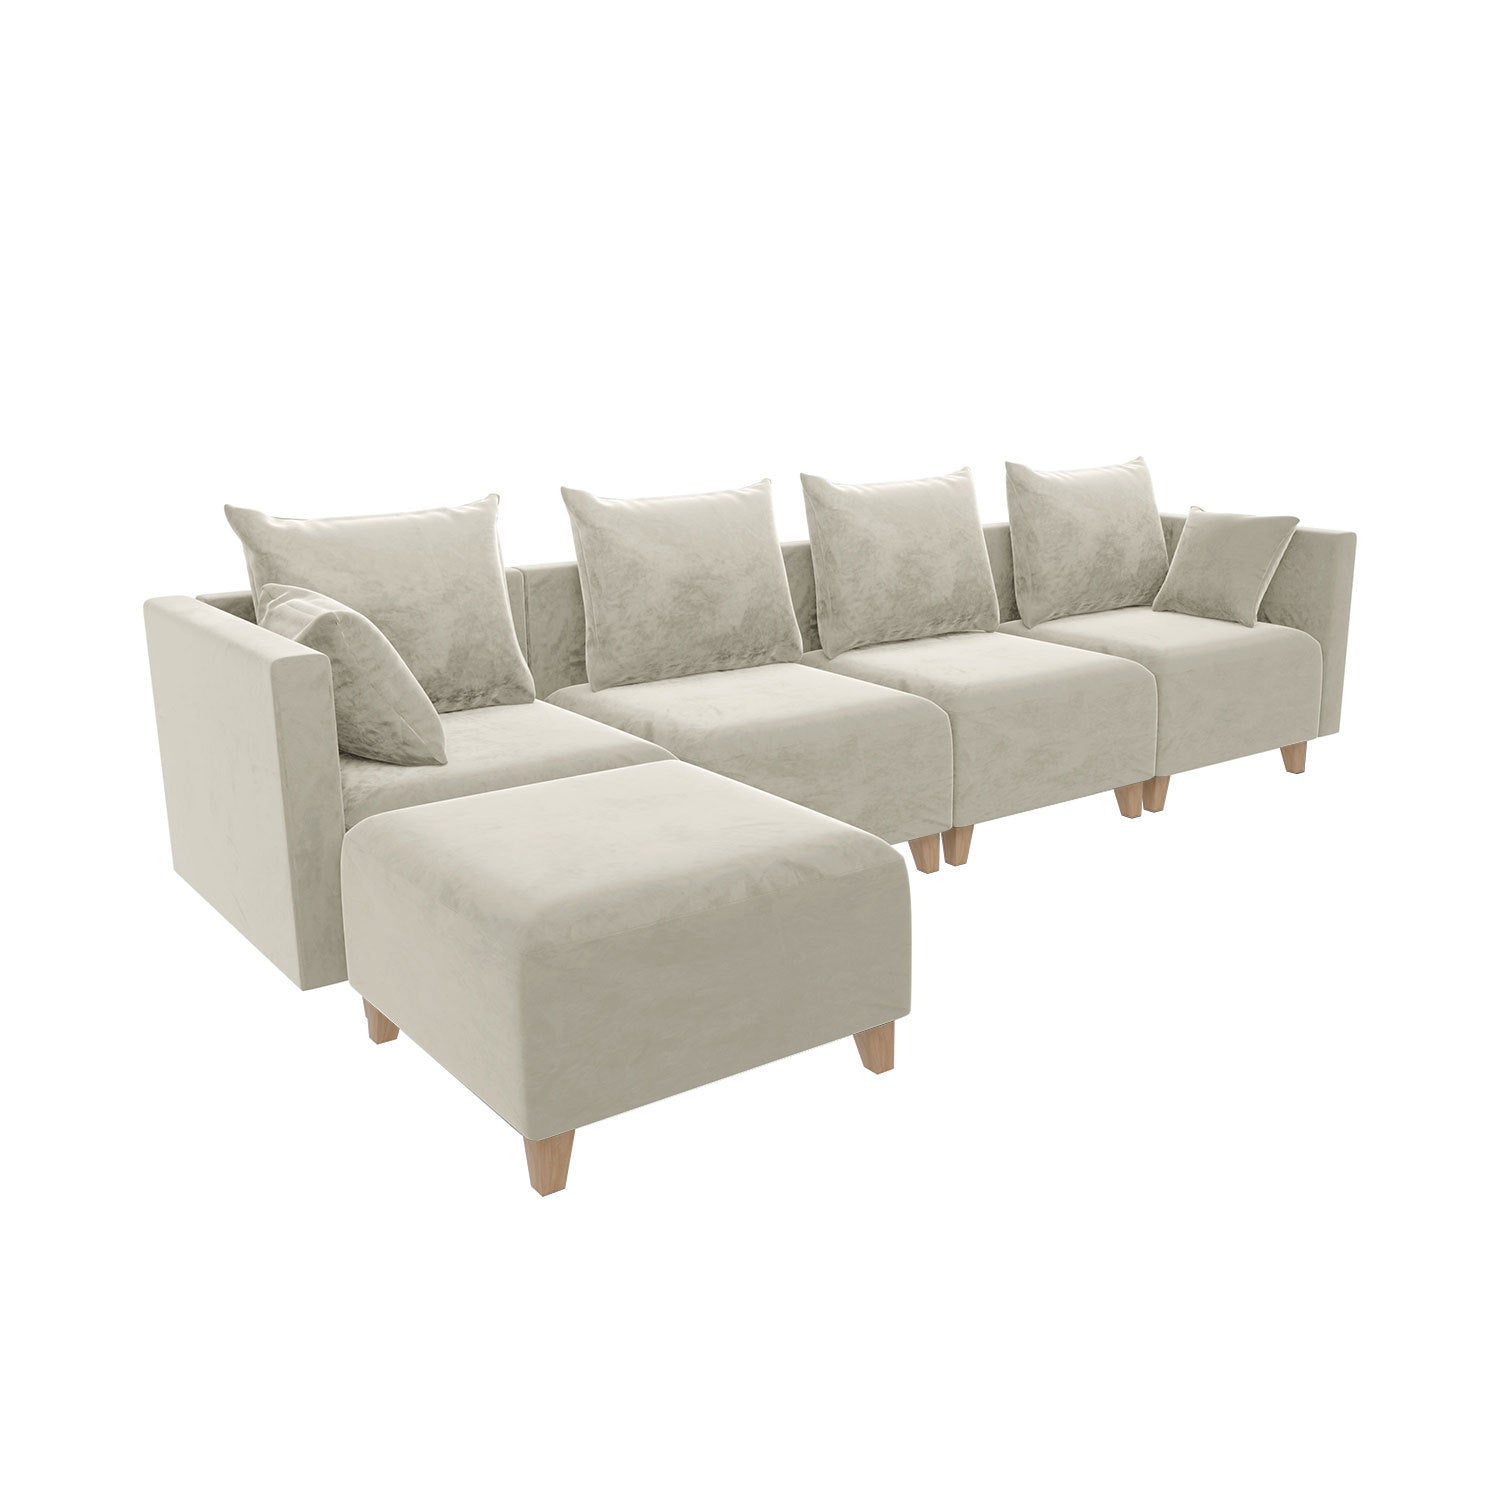 Sectional Sofa, L shape Module Couch with 5 seats 6 Pillows